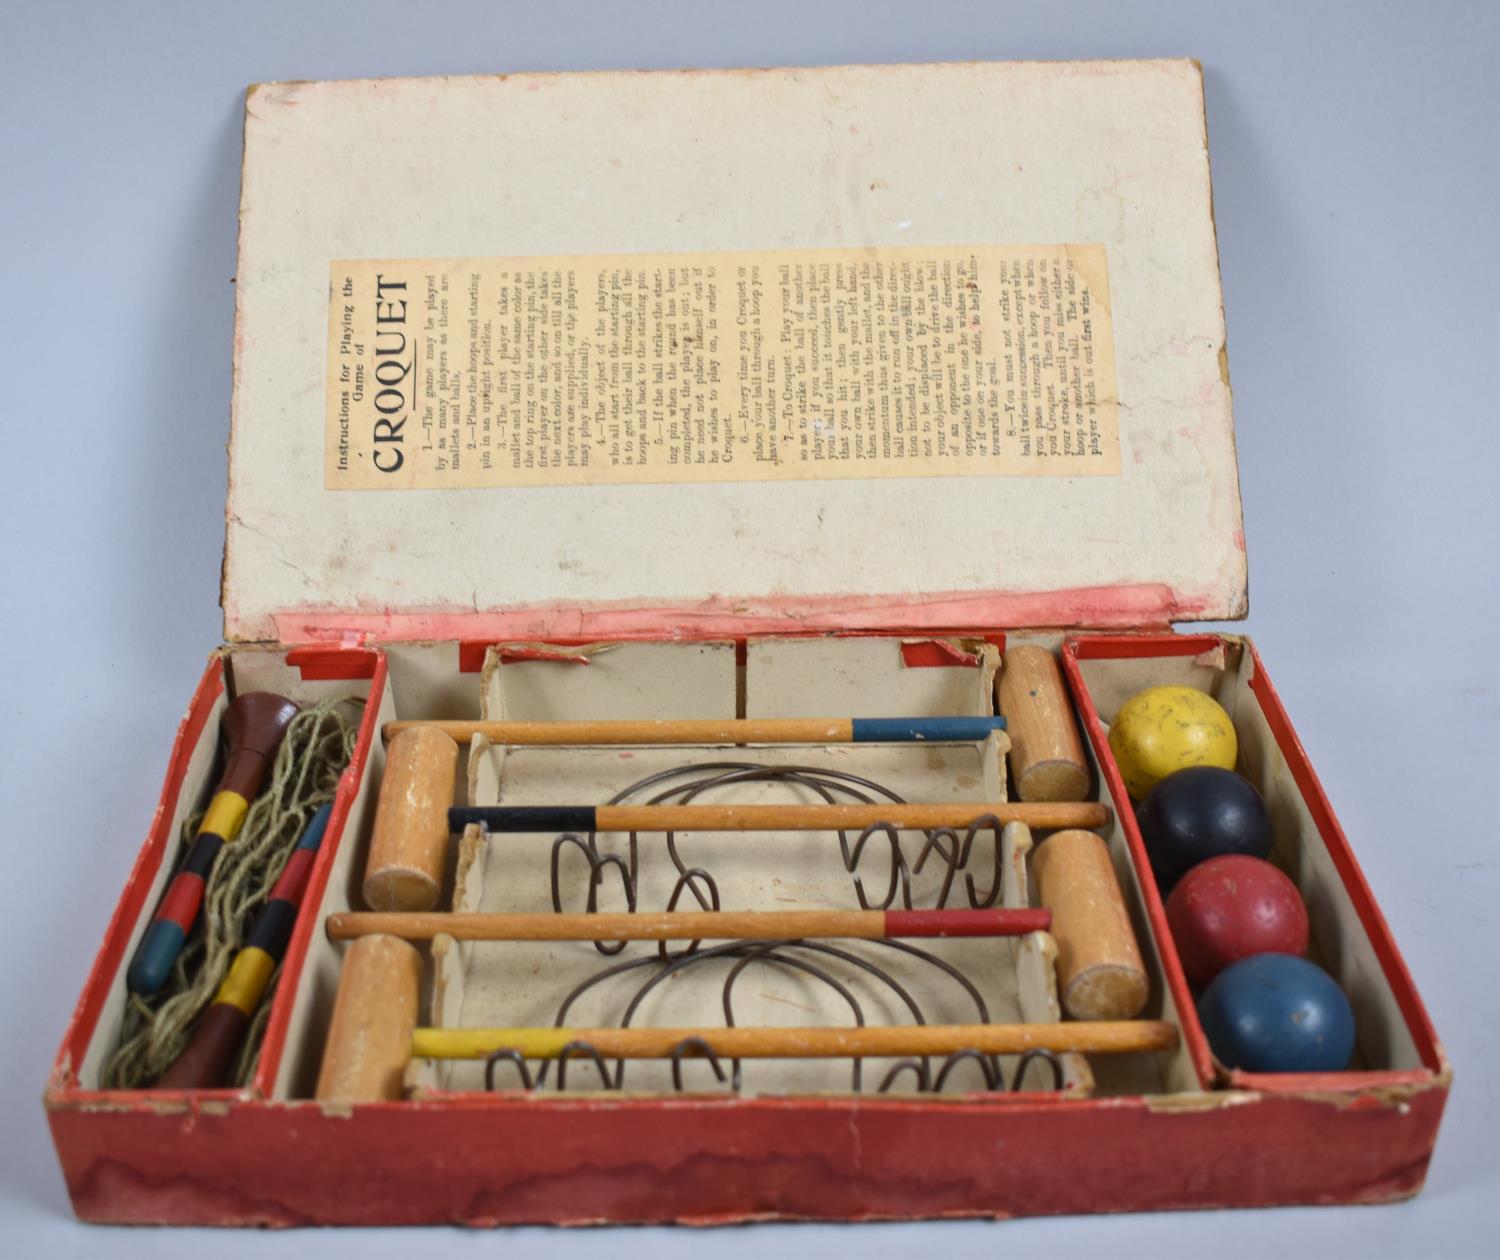 A Late Victorian/Edwardian Table Croquet Game, with Hoops, Hammers, Balls and Pegs, Original Box, - Image 2 of 2